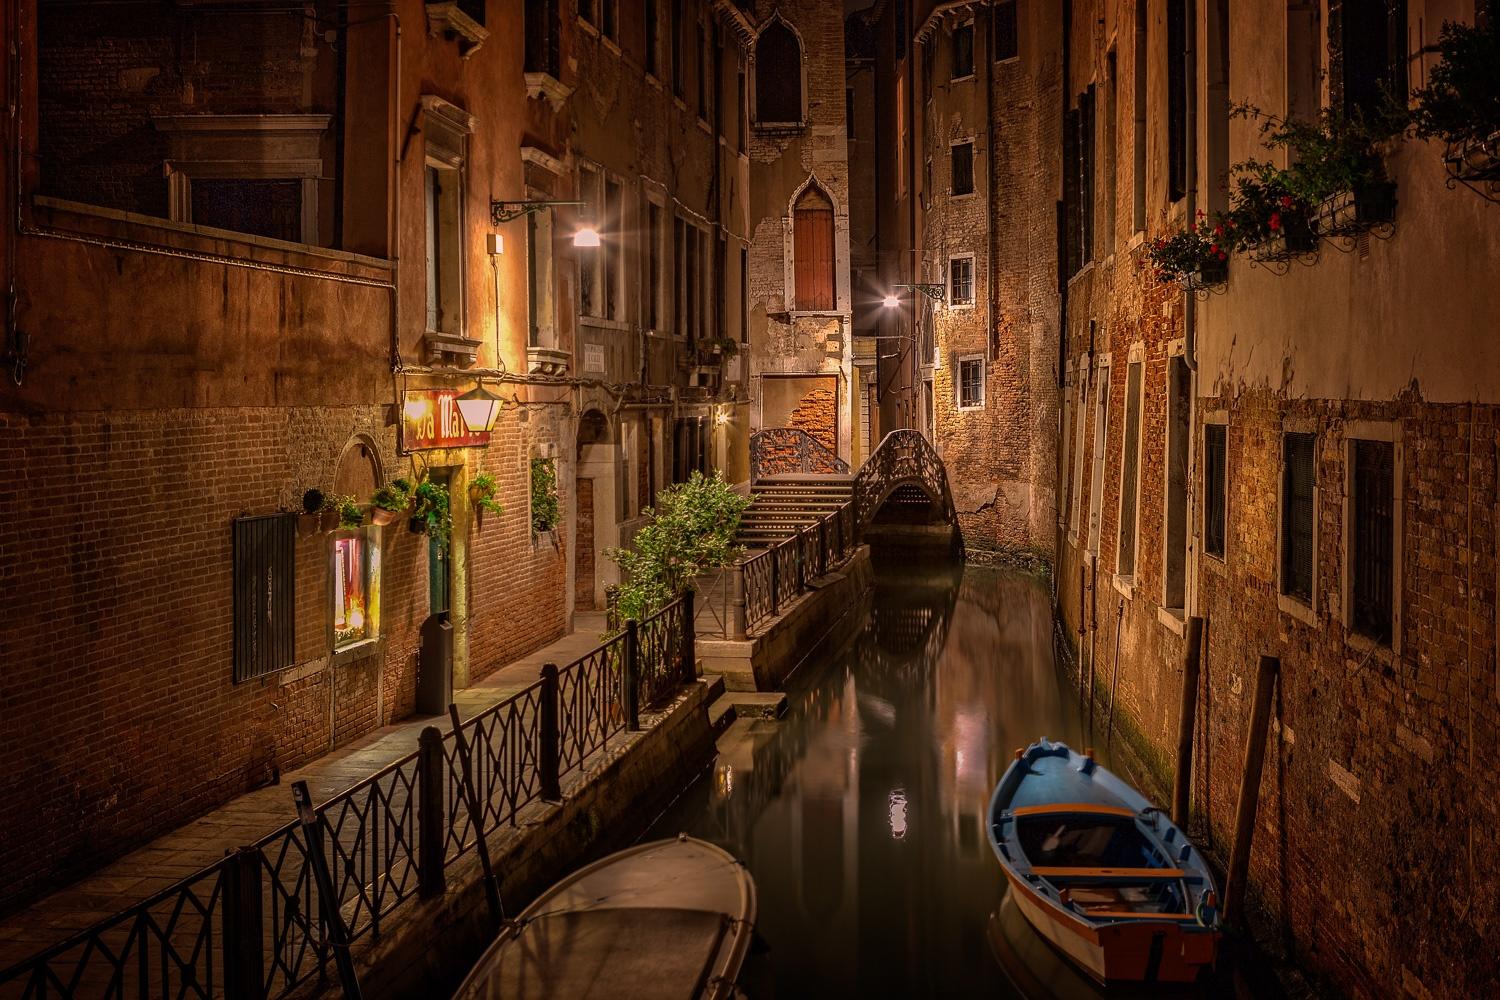 Alley of Venice at night